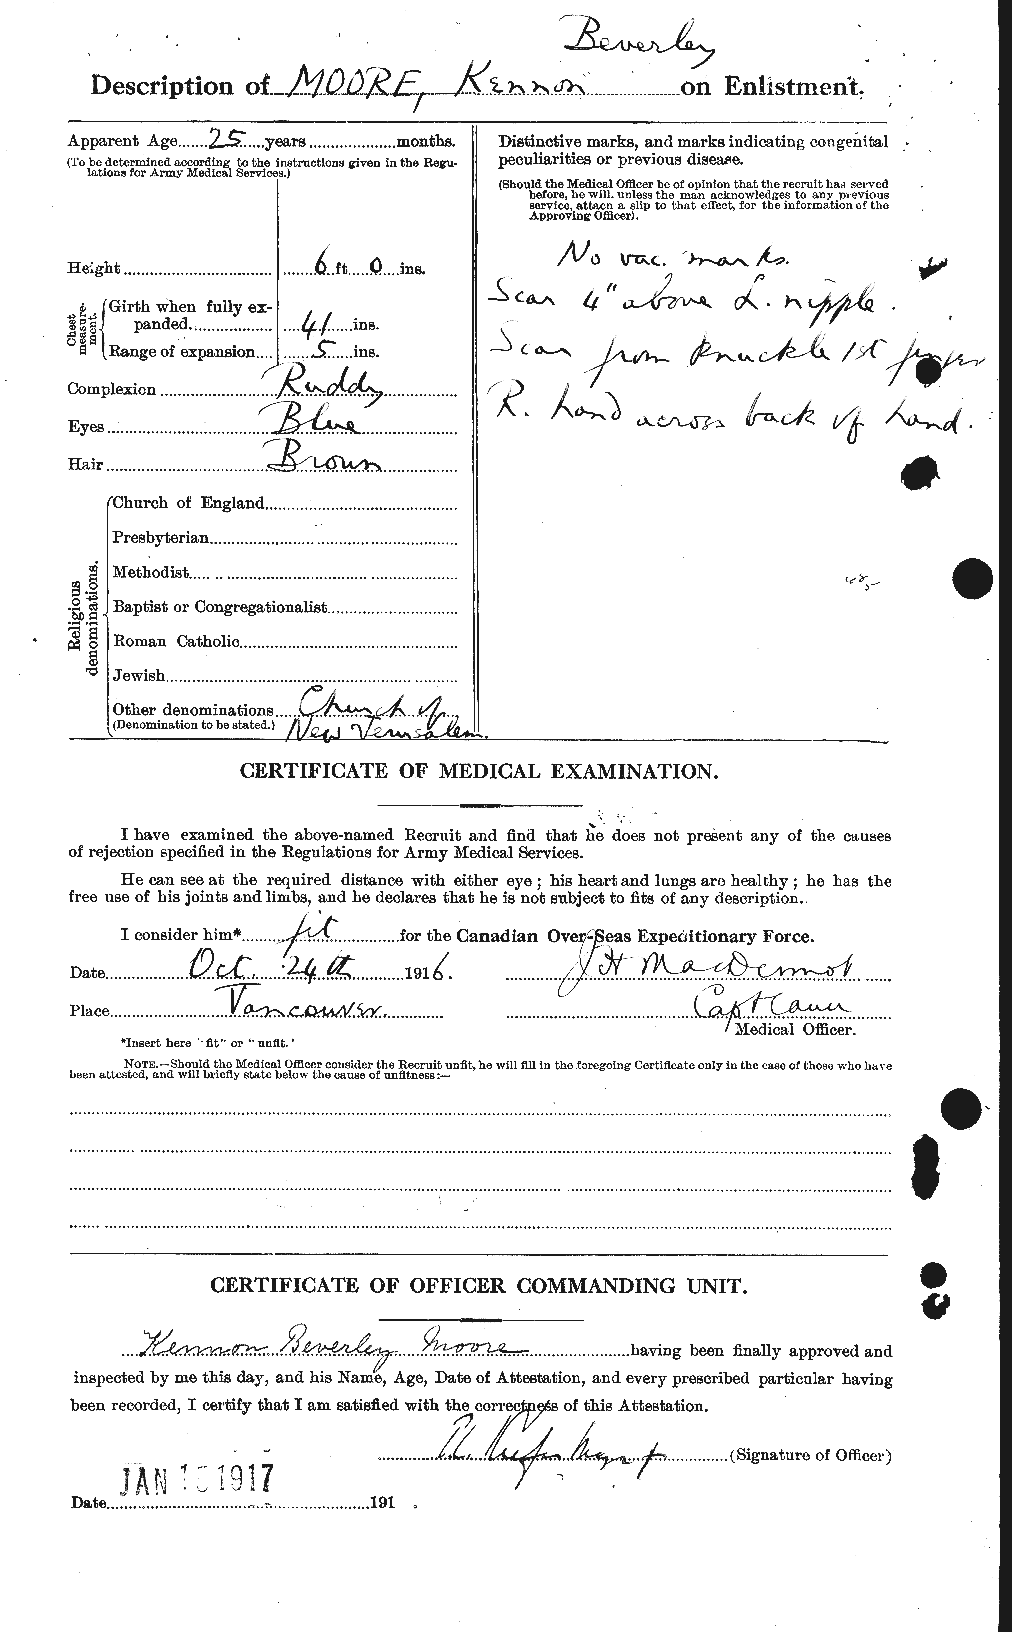 Personnel Records of the First World War - CEF 503388b